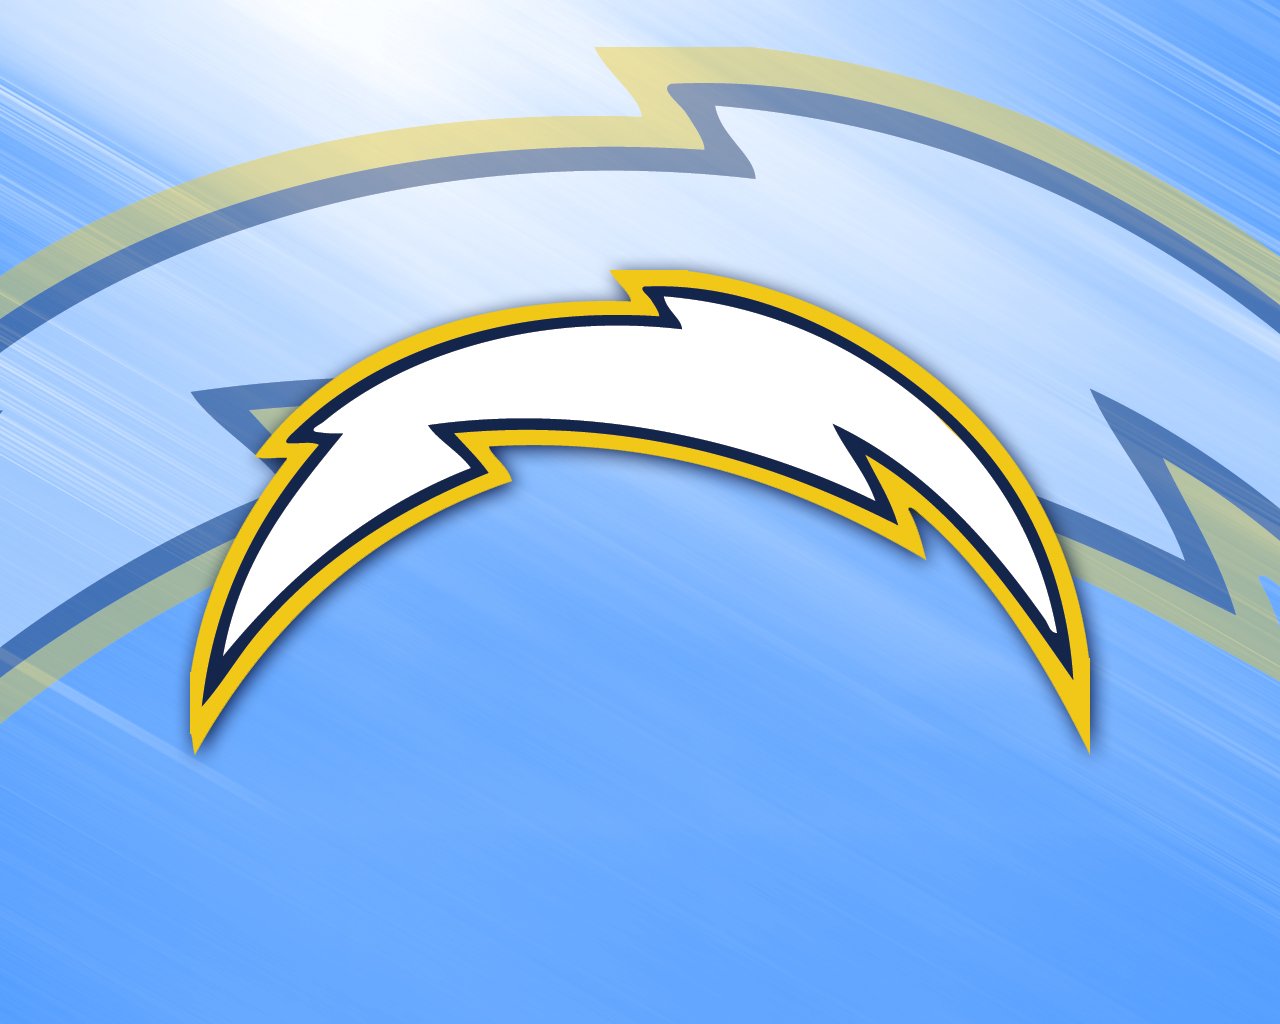 Did You Hear the Rumor about the CHARGERS? - KUSI News - San Diego, CA